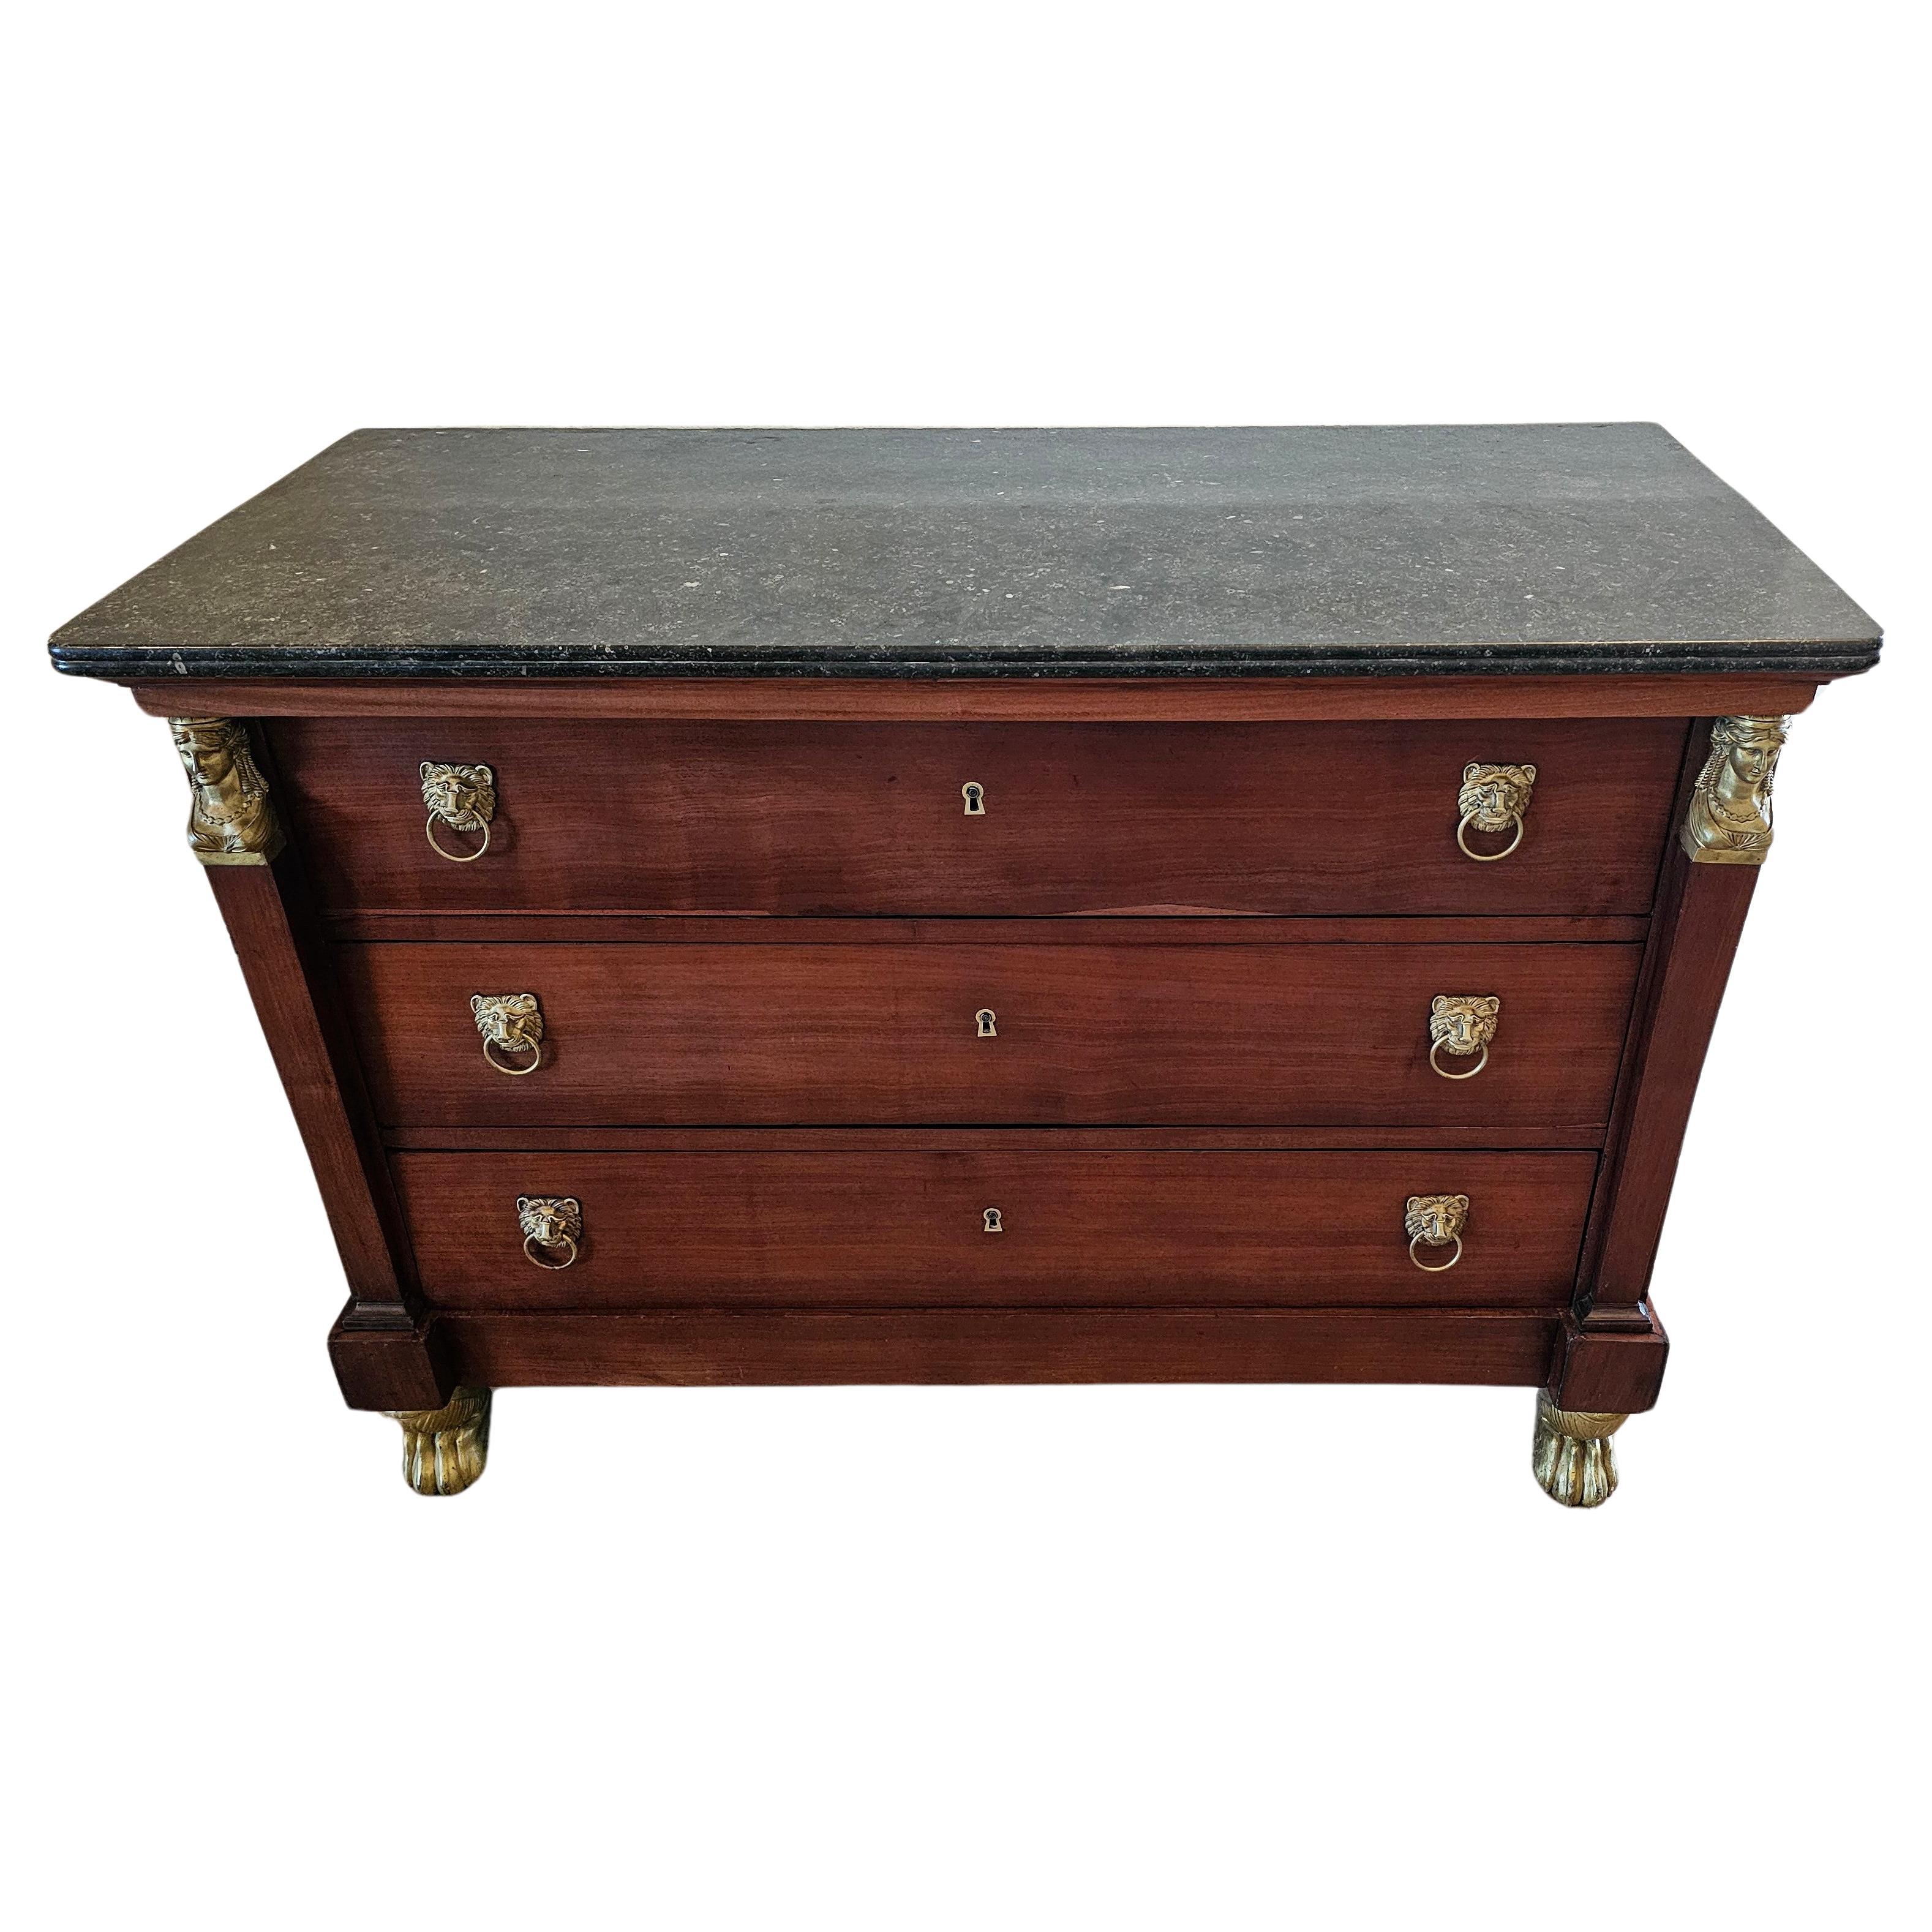 A striking French Empire style mahogany chest of drawers commode with warm rich patina. circa 1820

Born in France during the early 19th century Restauration Period (1815-1830), hand-crafted of mahogany with oak secondary, having a rectangular